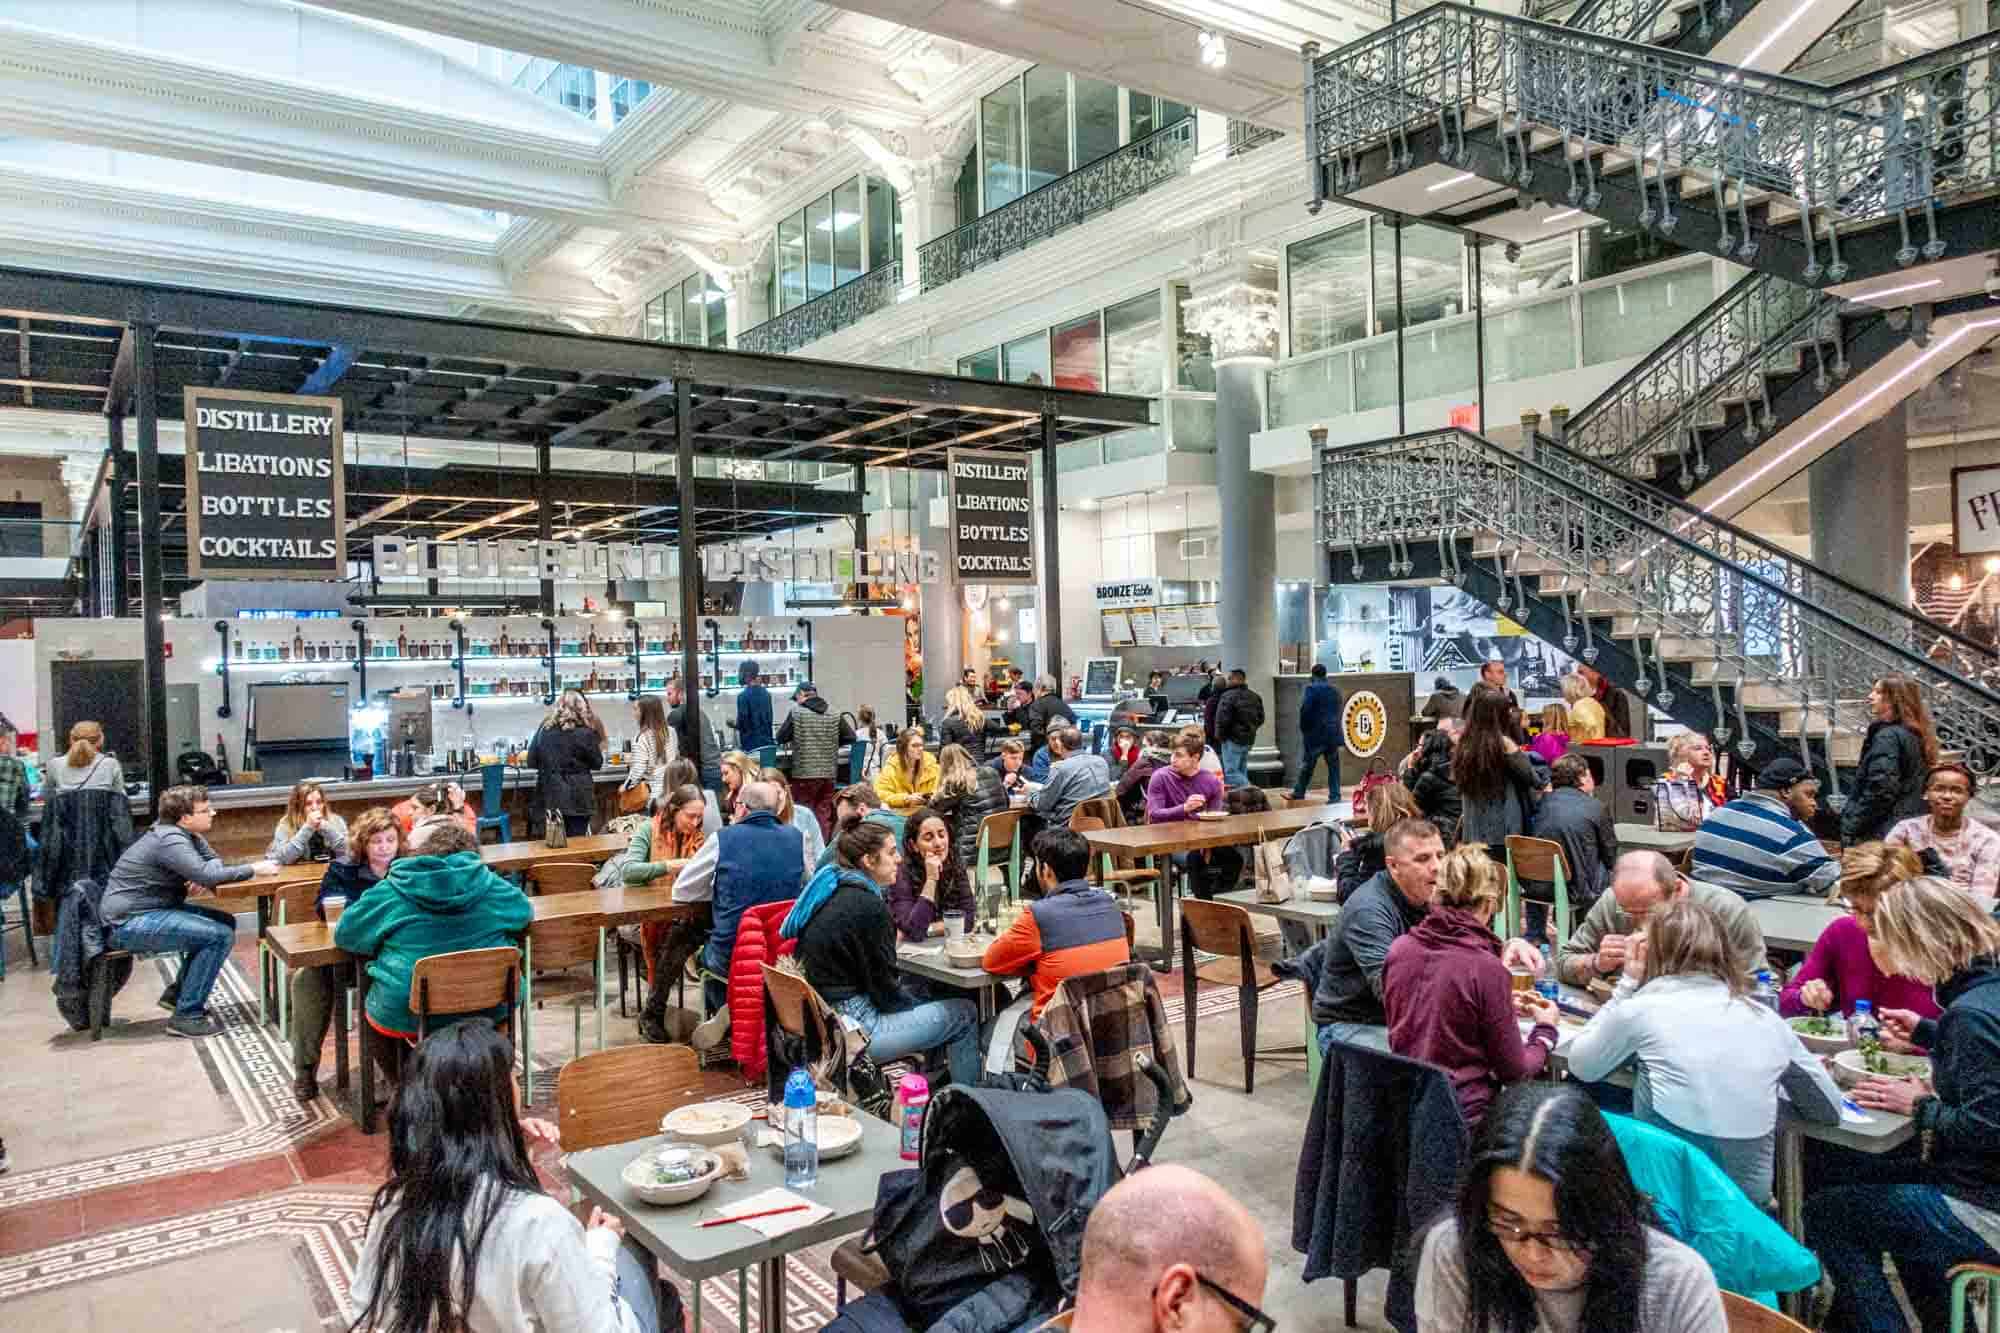 People eating at tables in a food hall.